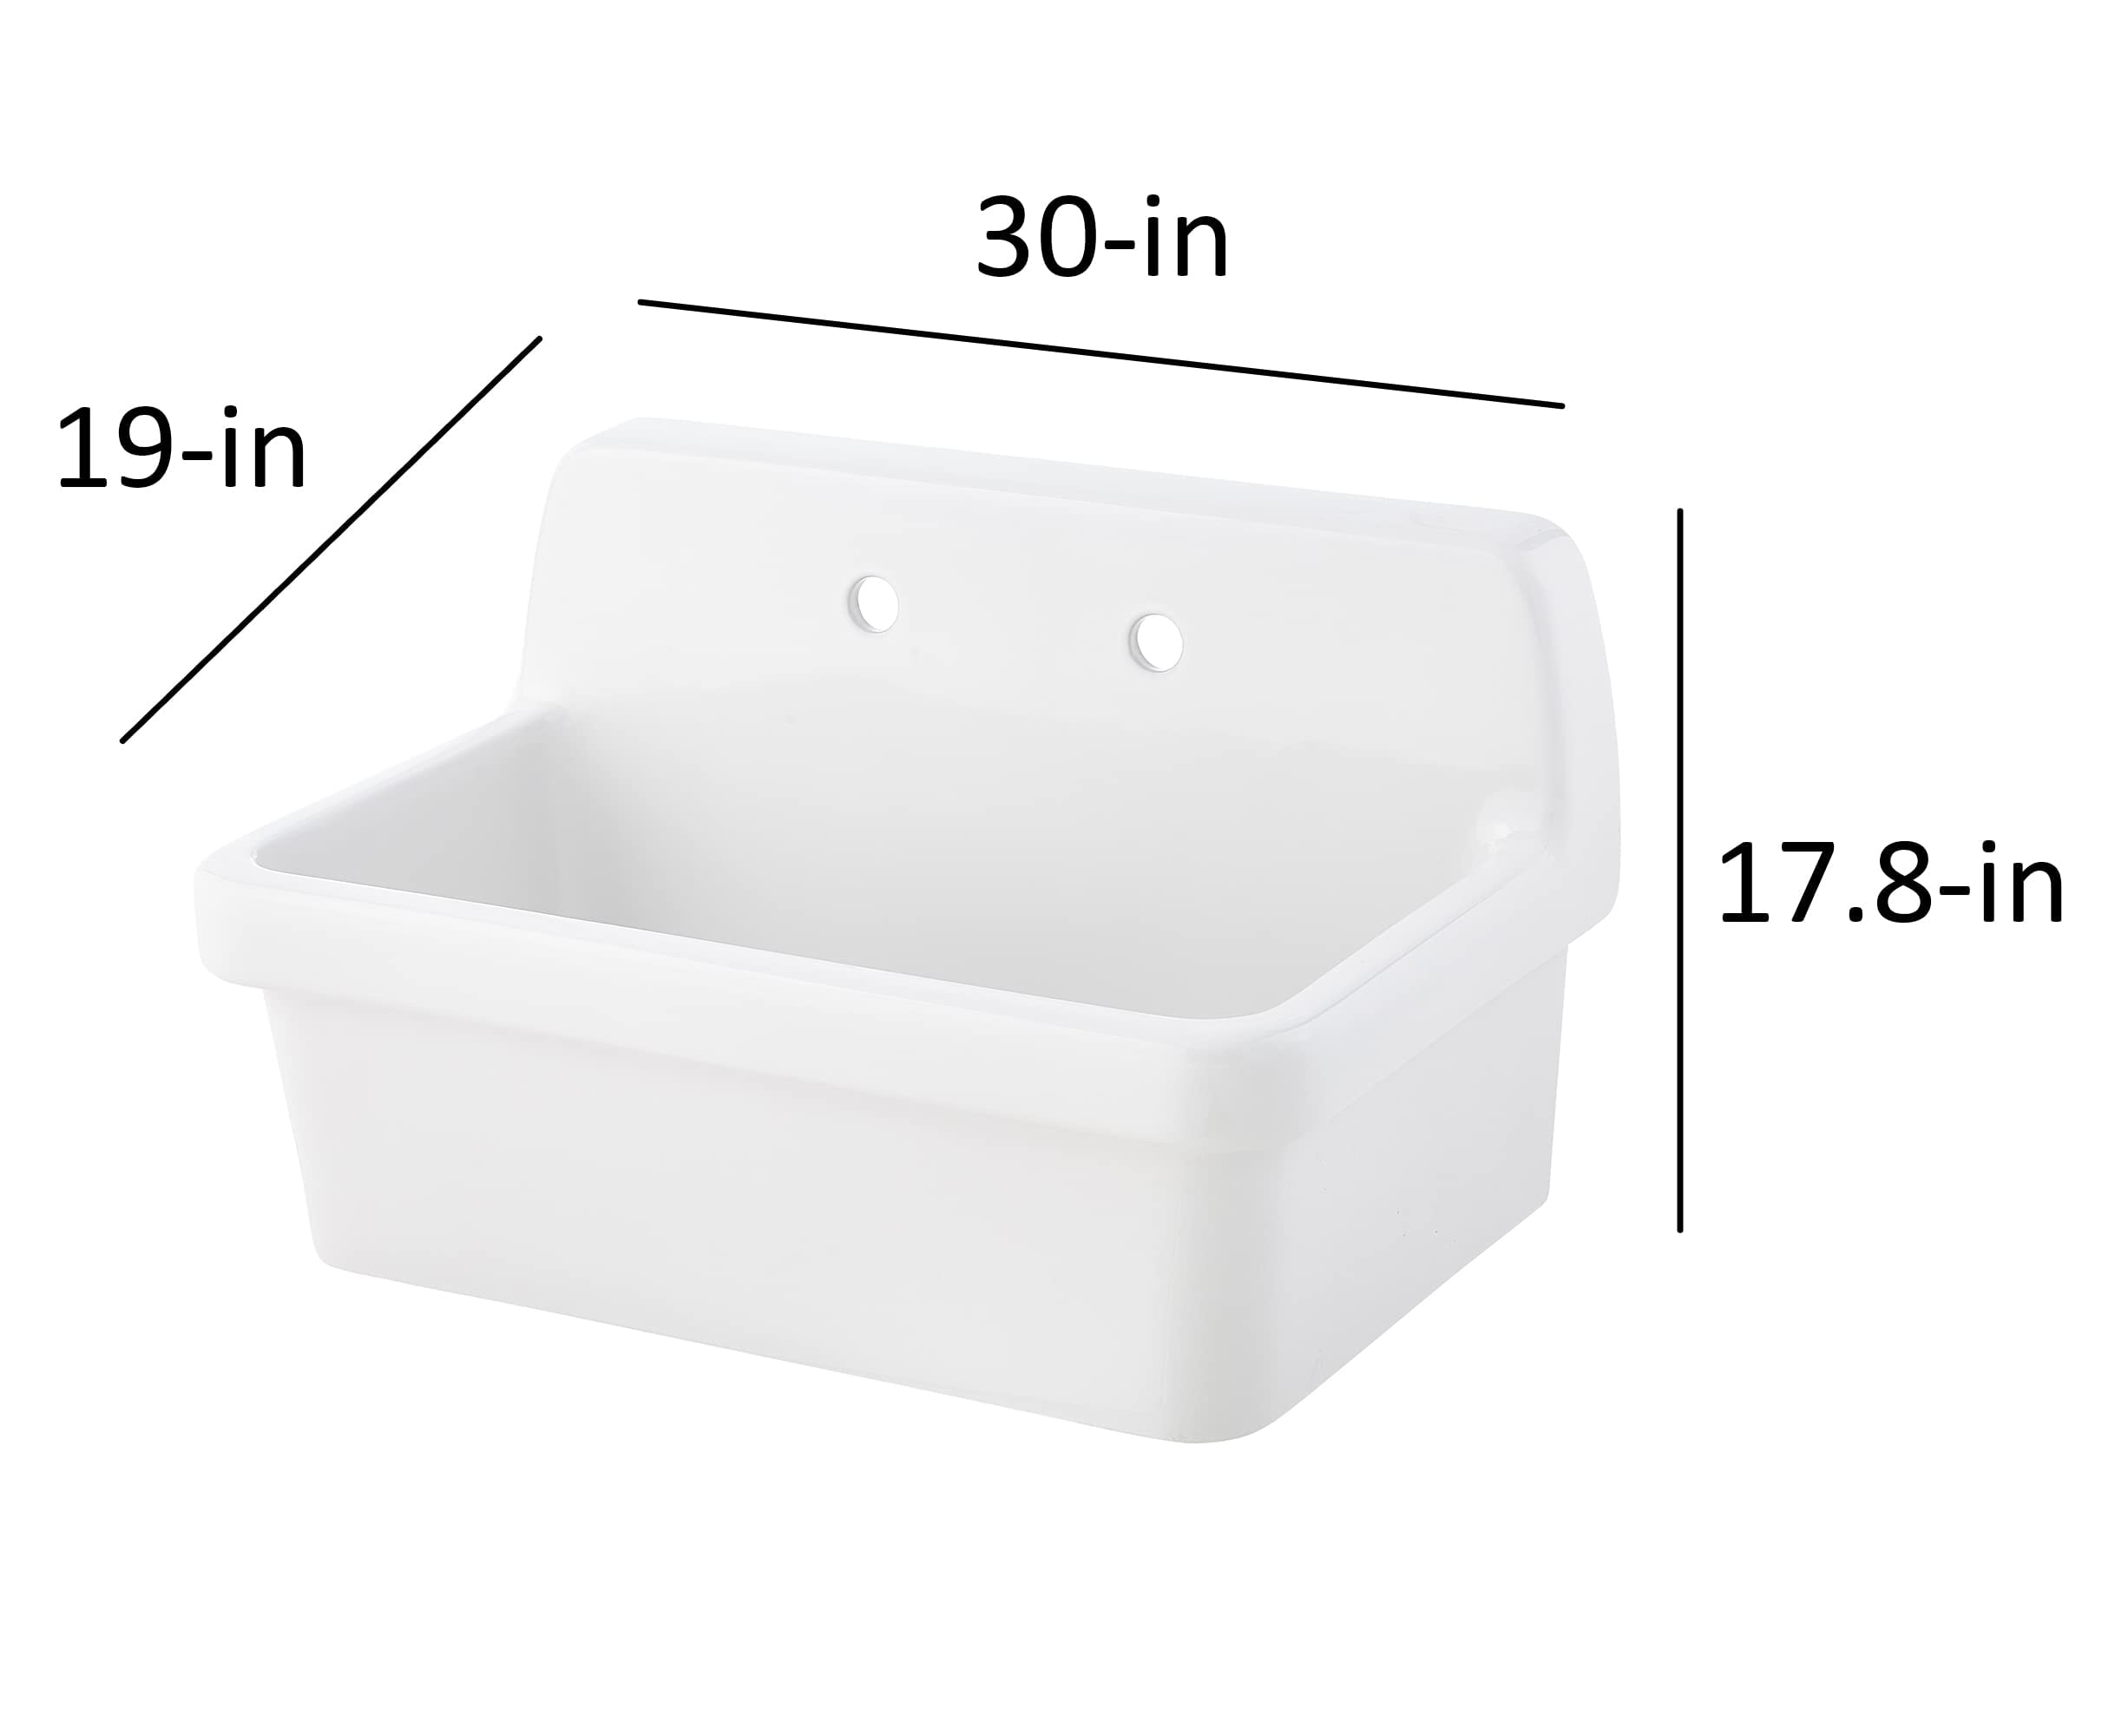 ELLAI 30 Inch White Wall Mount Utility Sink High Back Wall Mounted Ceramic Laundry Tub 15 Gallon Slop Sink for Laundry Room, Garage, Kitchen, Basement 30" x 19" x 18"